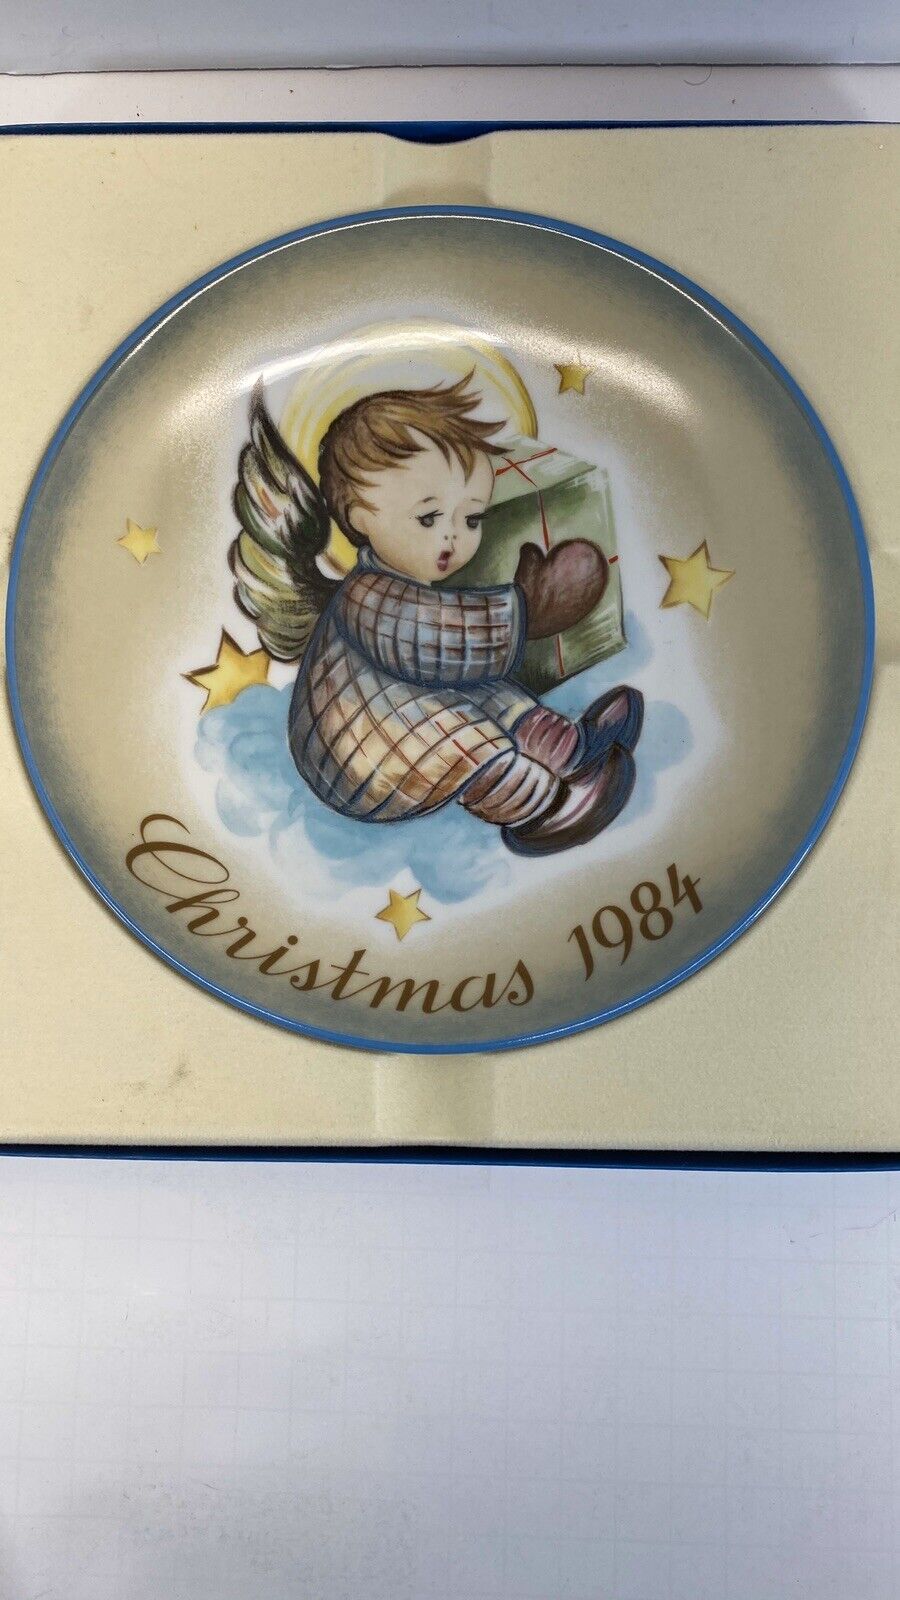 Schmid Christmas 1984 Gift From Heaven Plate 1984